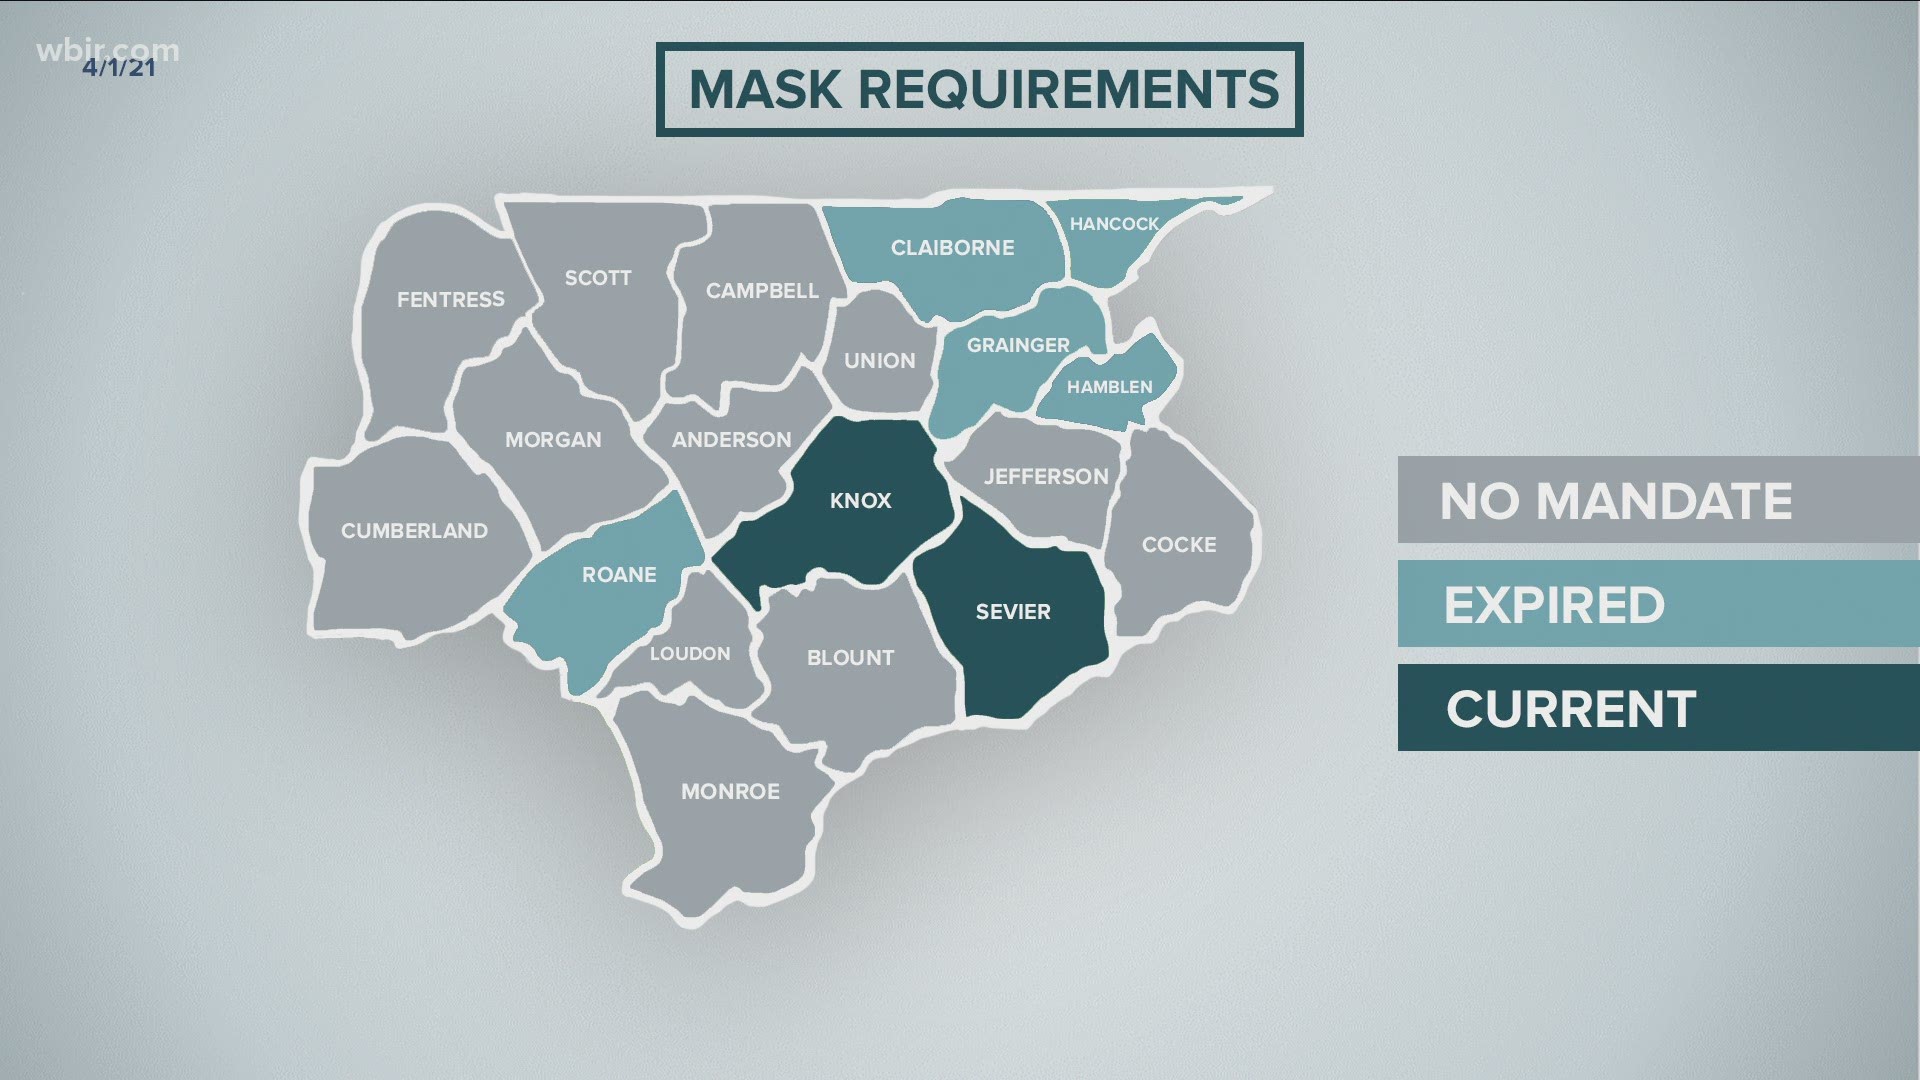 In Knox County, a third of the Board of Health's criteria for relaxing restrictions is met. However, health experts say it's too soon to stop wearing masks.